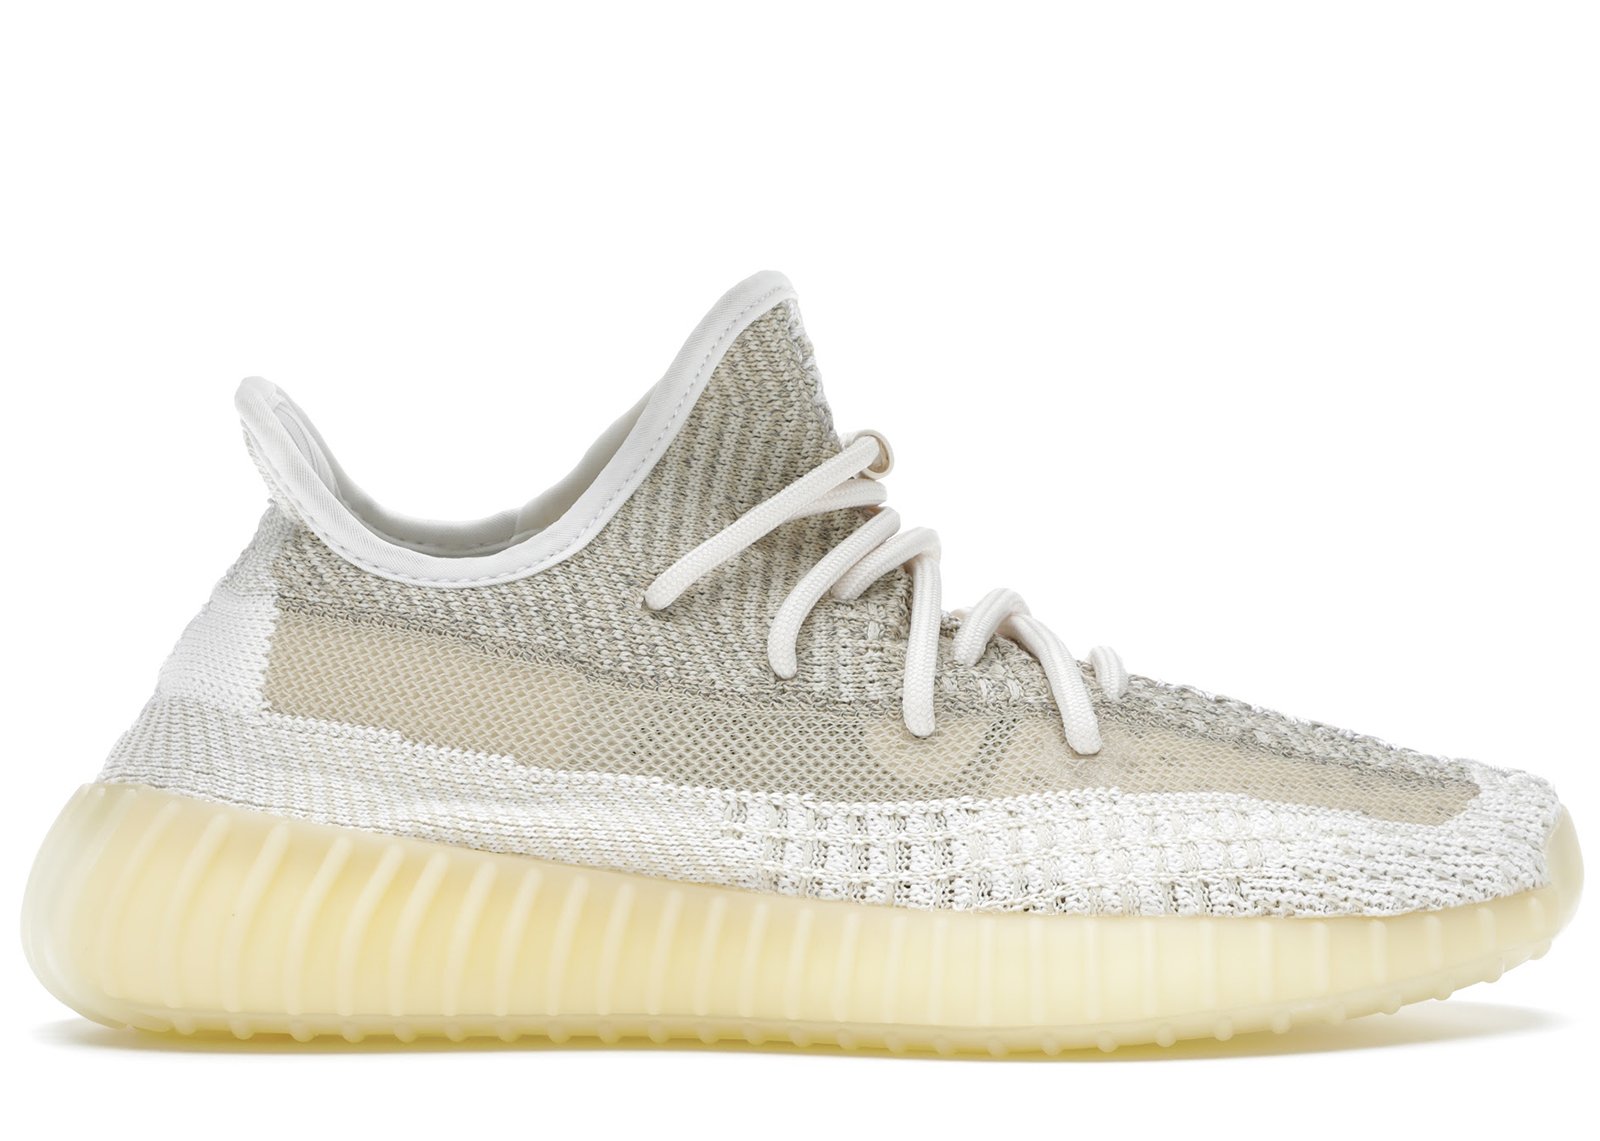 adidas Yeezy Boost 350 V2 Natural sneakers